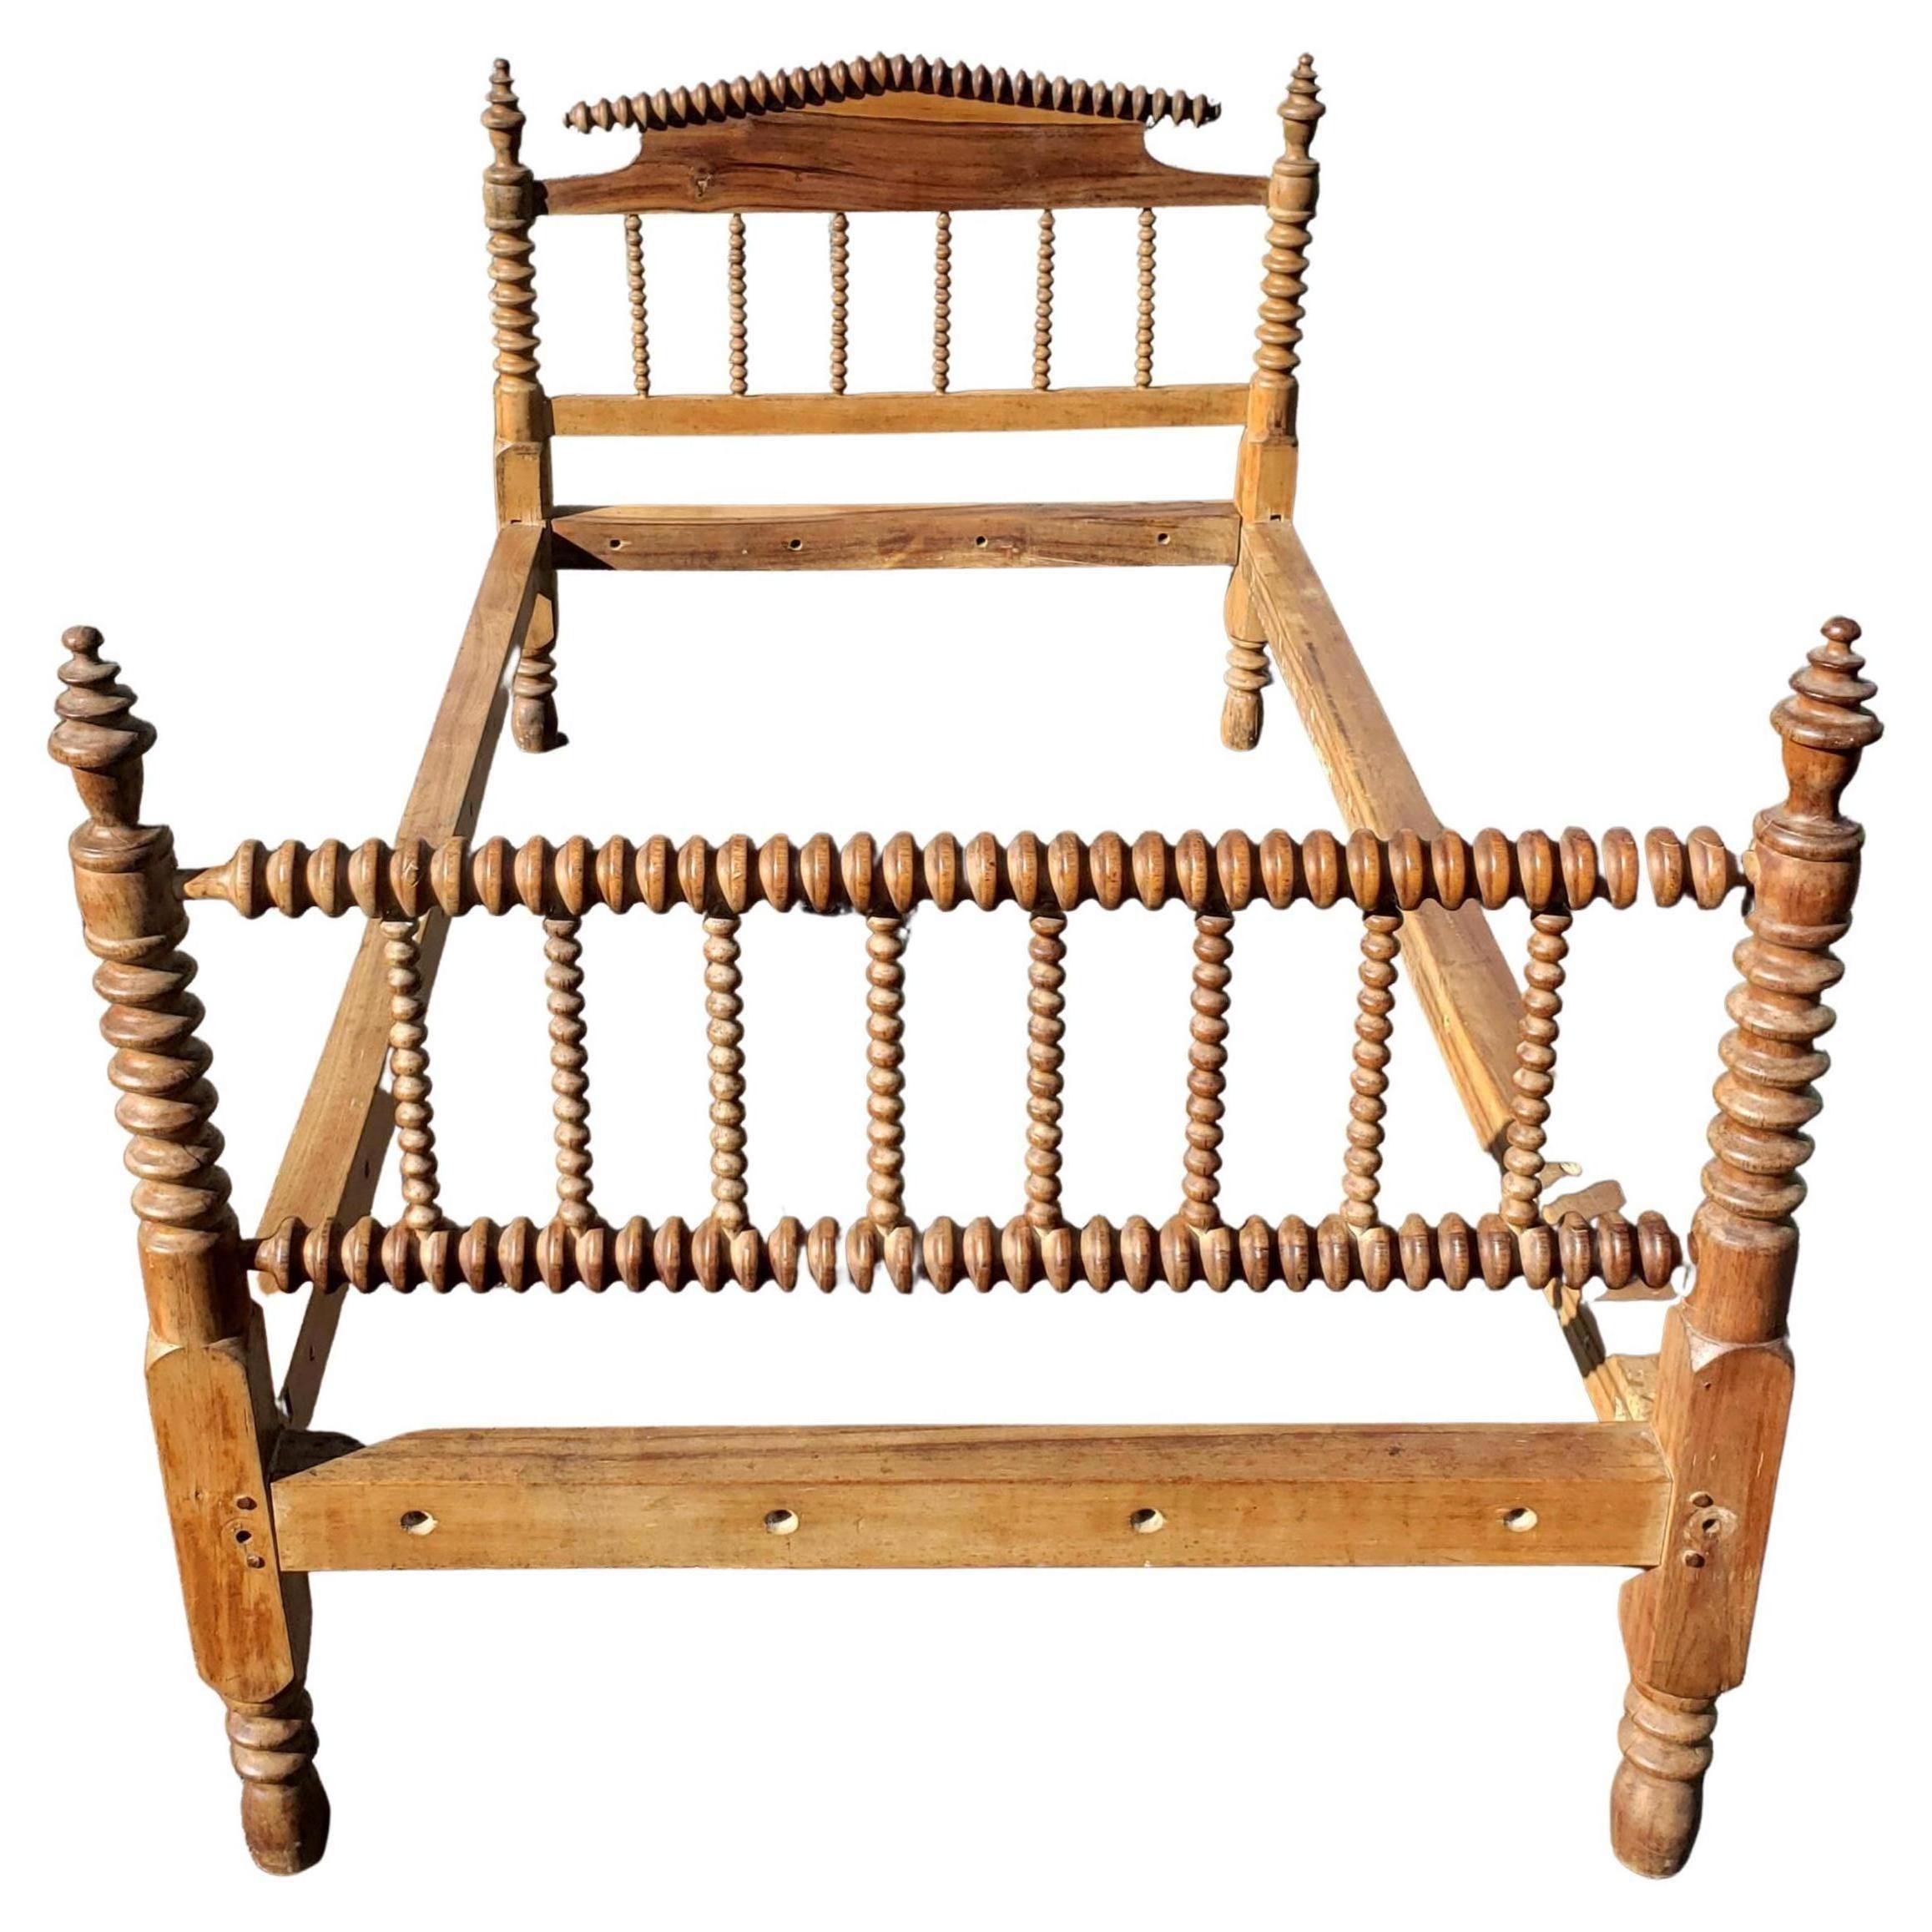 This bed has a lot of age (Circa 1800s) to it but was very sturdy when assembled and looks fabulous! These spool or ball turned beds have been fashionable for many years but have recently seen a resurgence in popularity and can work with a lot of